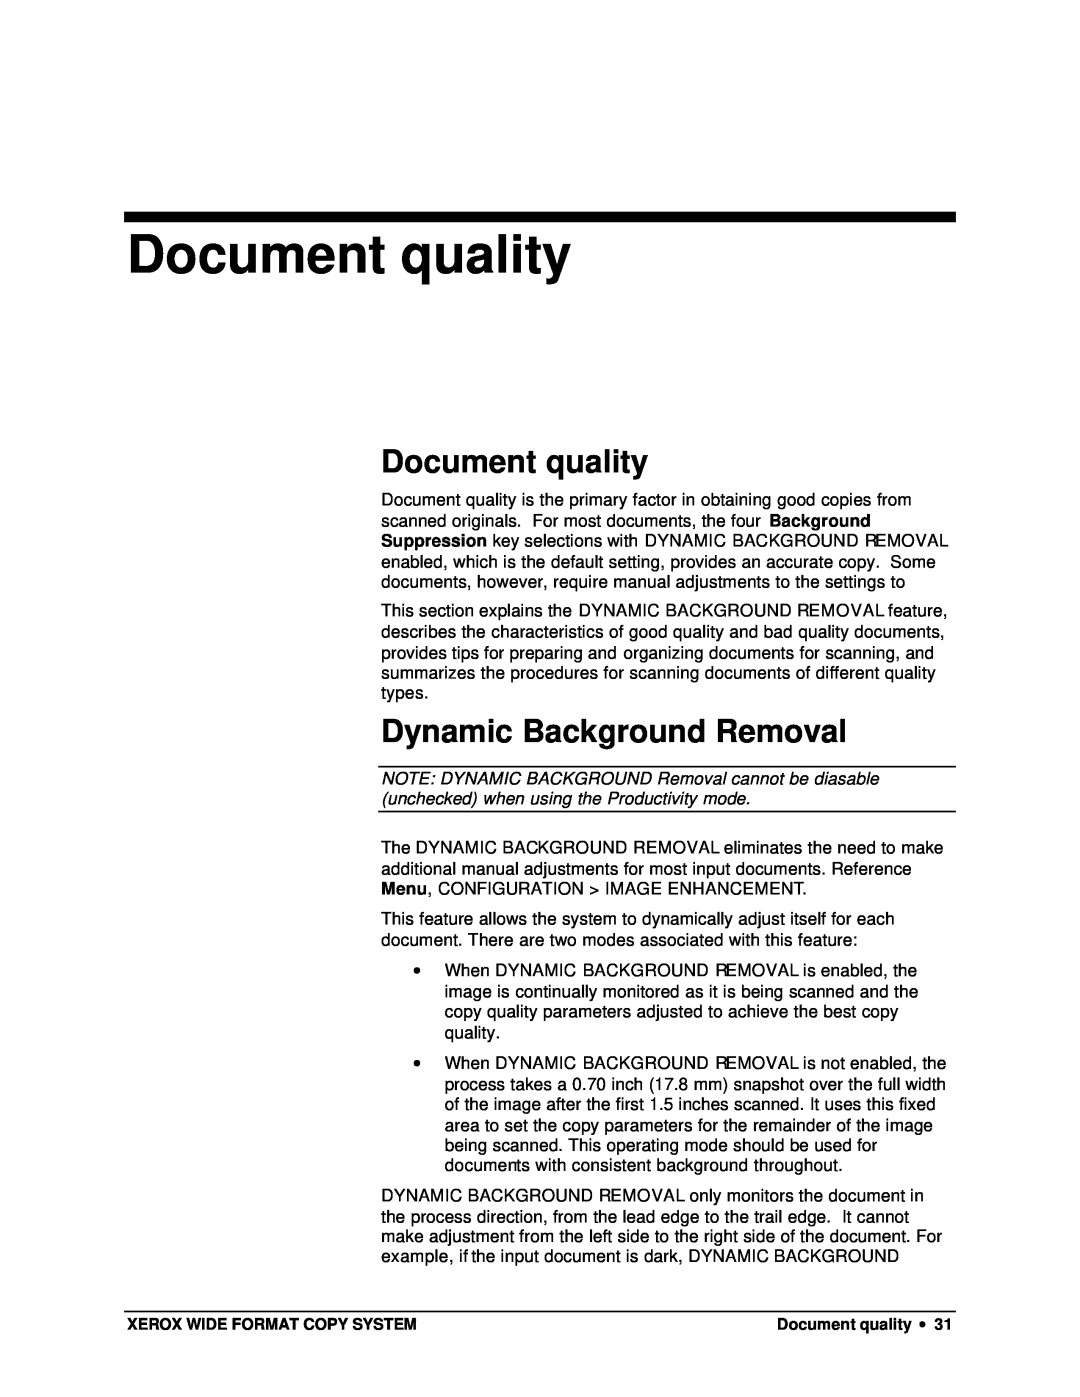 Xerox 8850, 8825, 8830, X2 manual Document quality, Dynamic Background Removal 